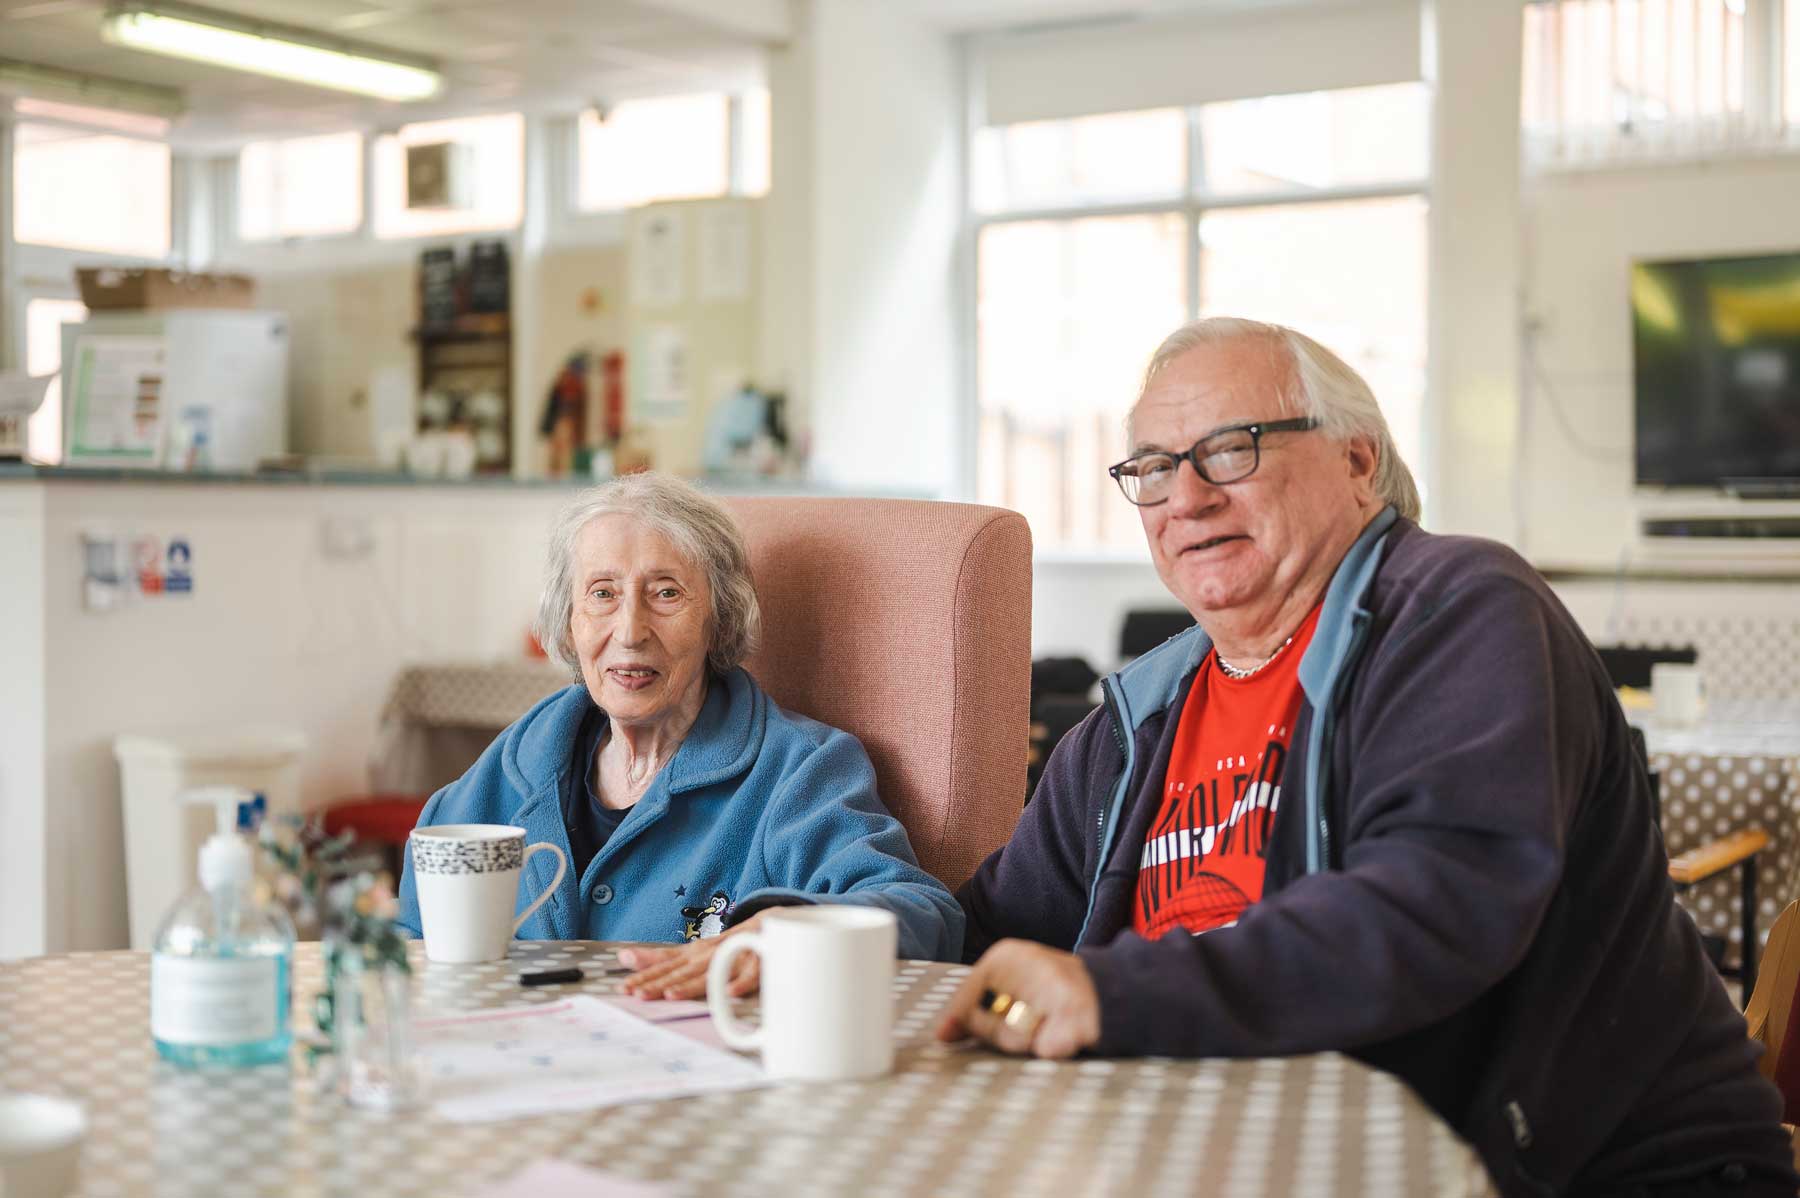 Two older adults sit at a dining table together